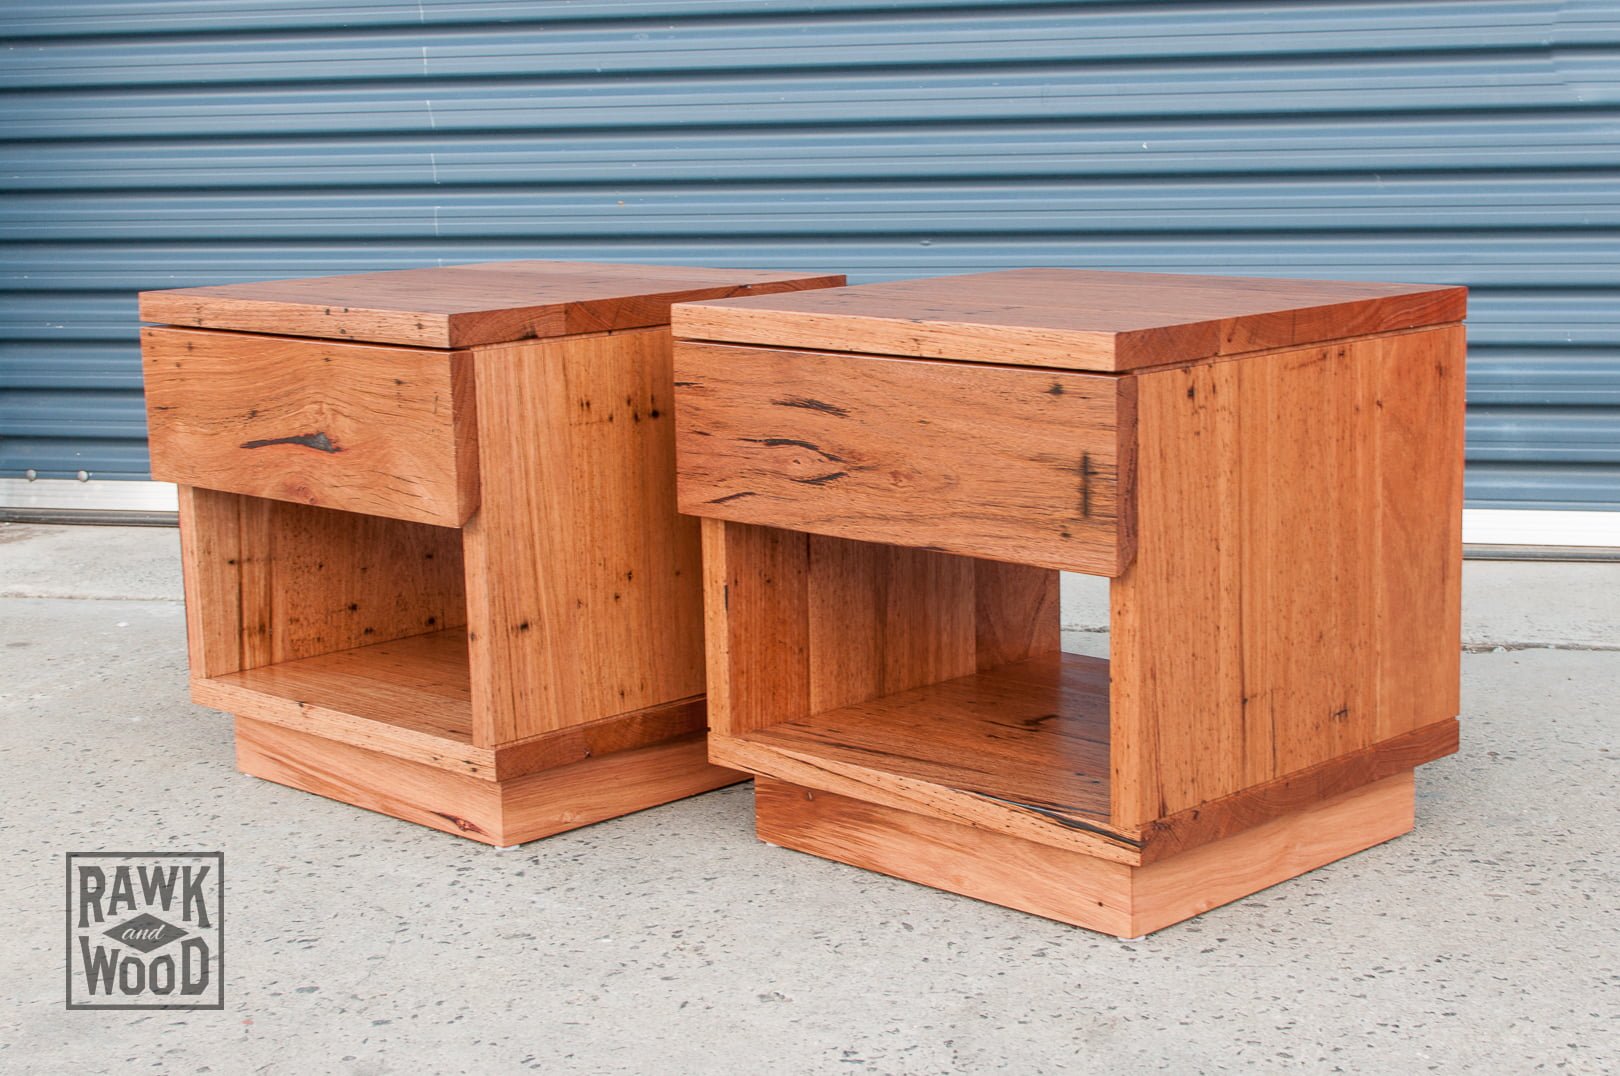 recycled-timber-bedside-tables, made in Melbourne by Rawk and Wood